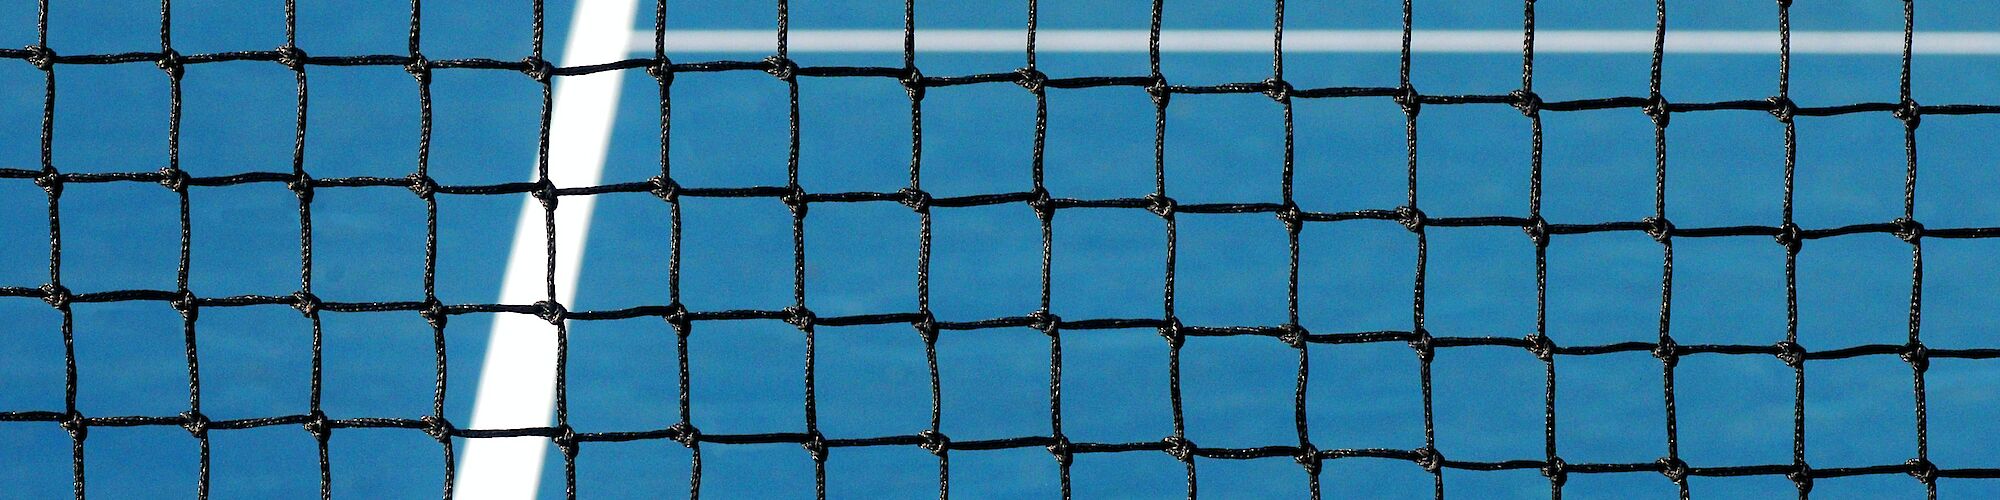 The image shows a blue tennis court with white lines, viewed through a black net. The top of the court is green, indicating the outfield.